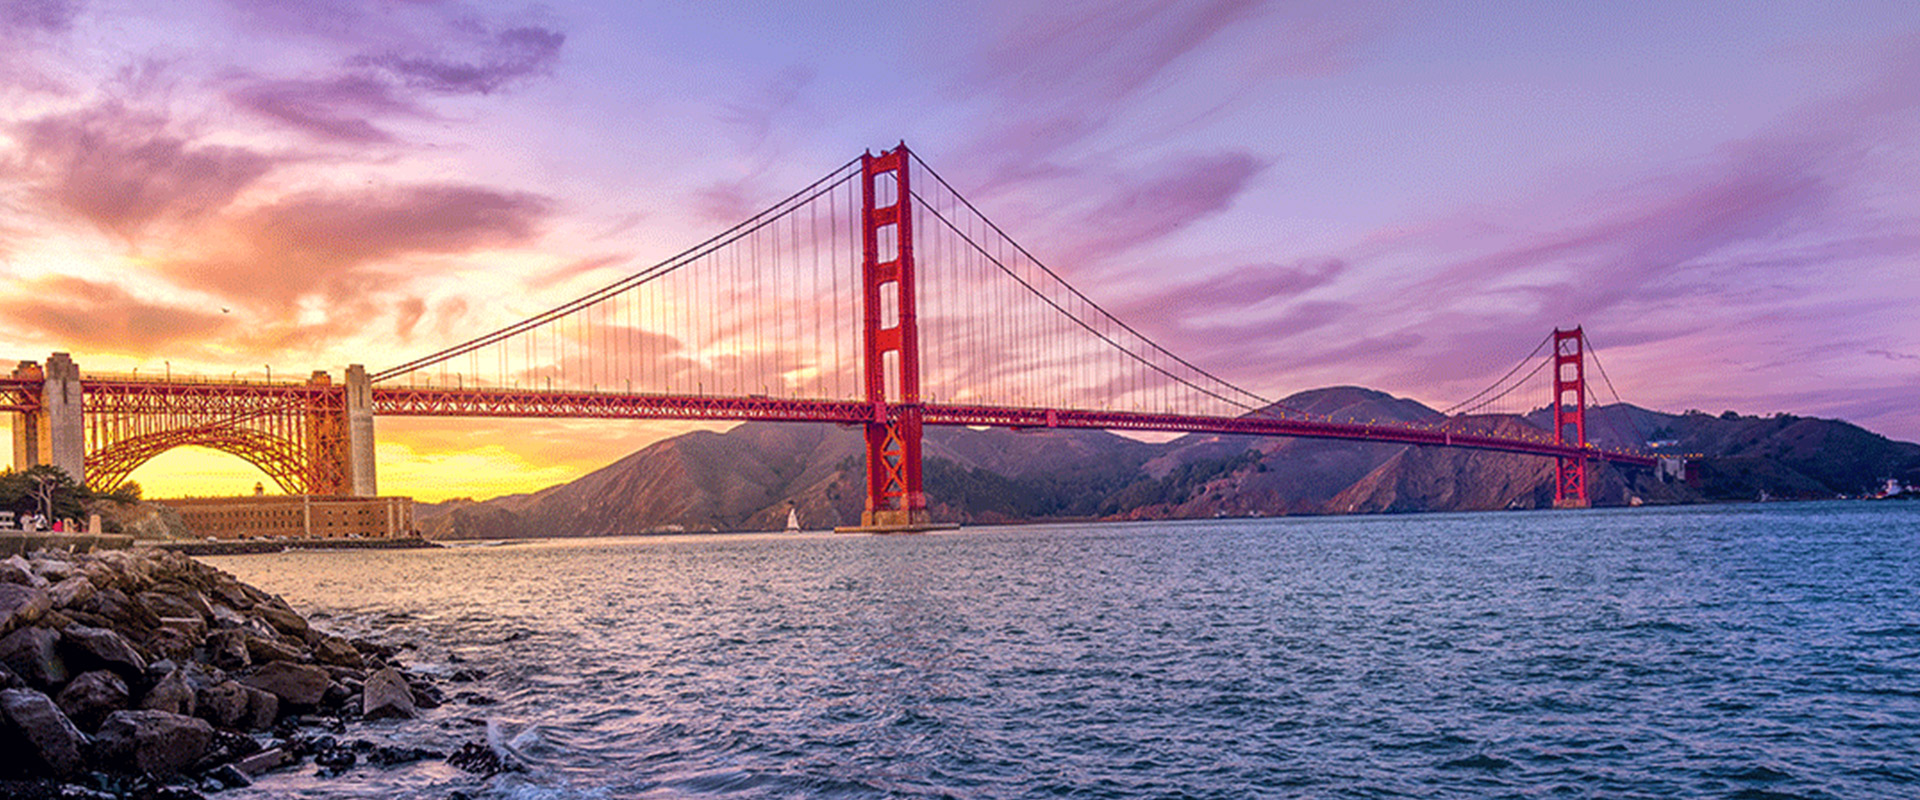 San Francisco's Golden Gate Bridge, with a purple and gold sunset sky